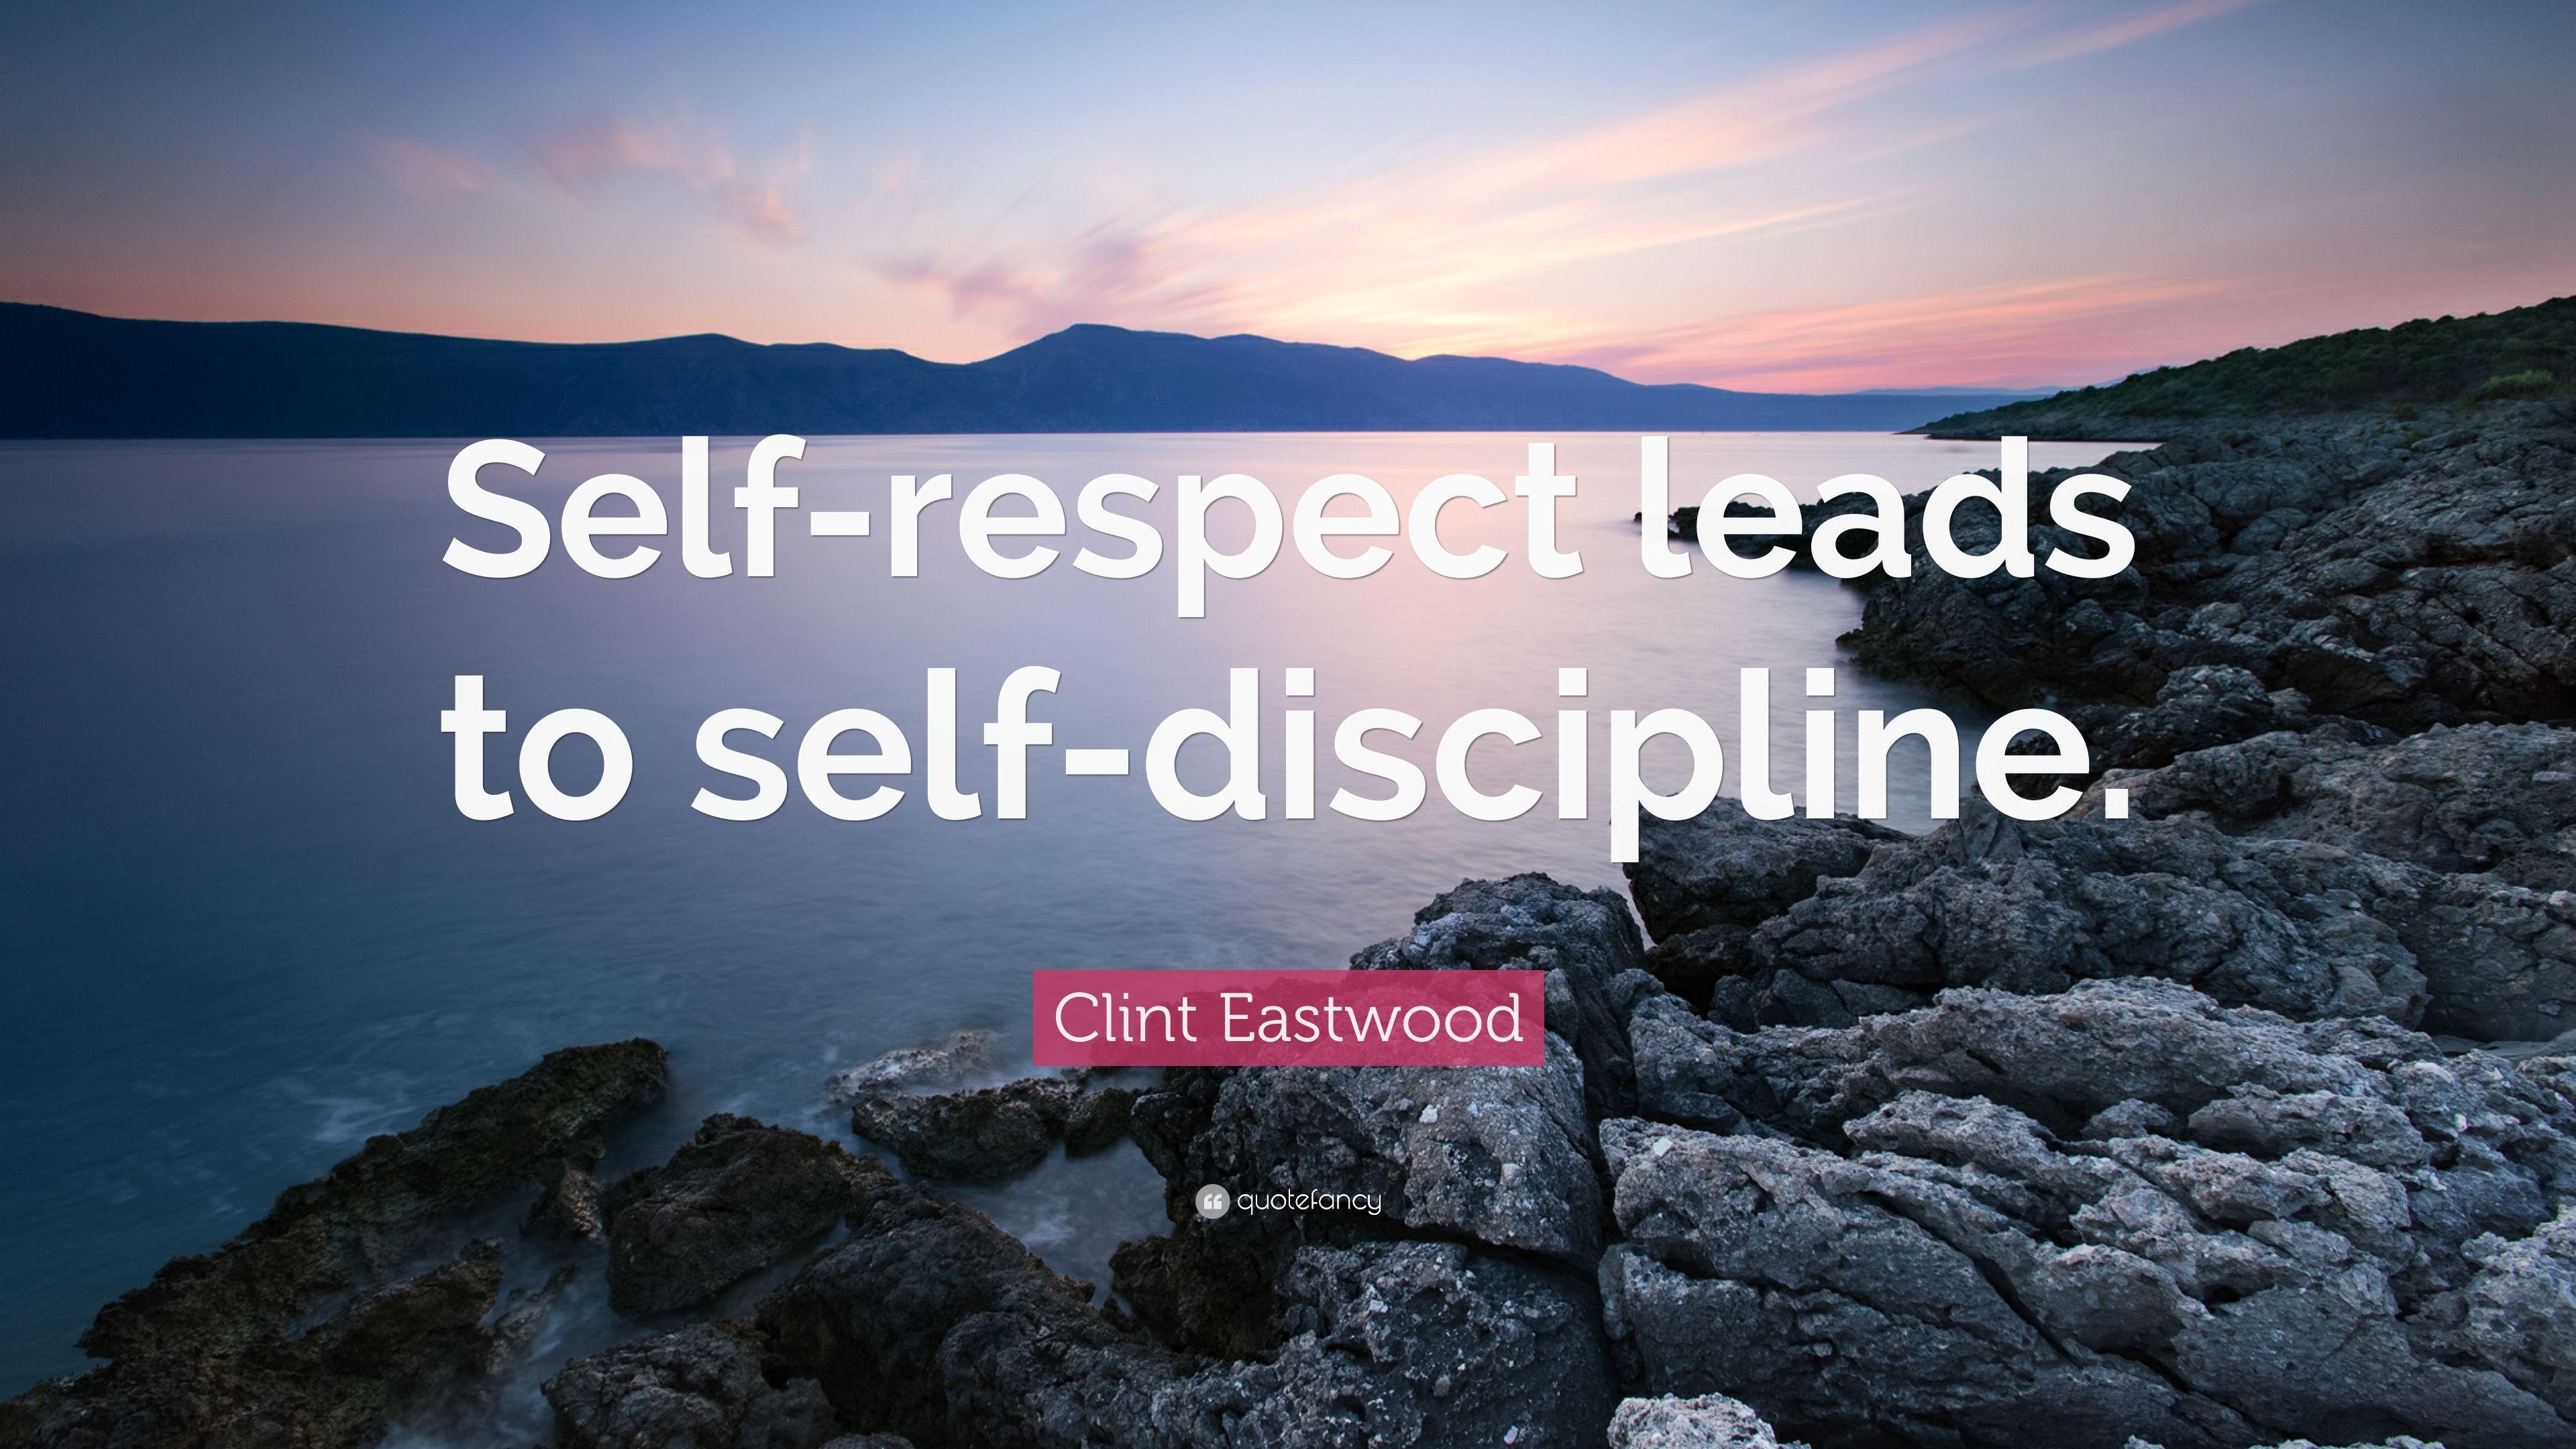 Clint Eastwood Quote: “Self Respect Leads To Self Discipline.” 10